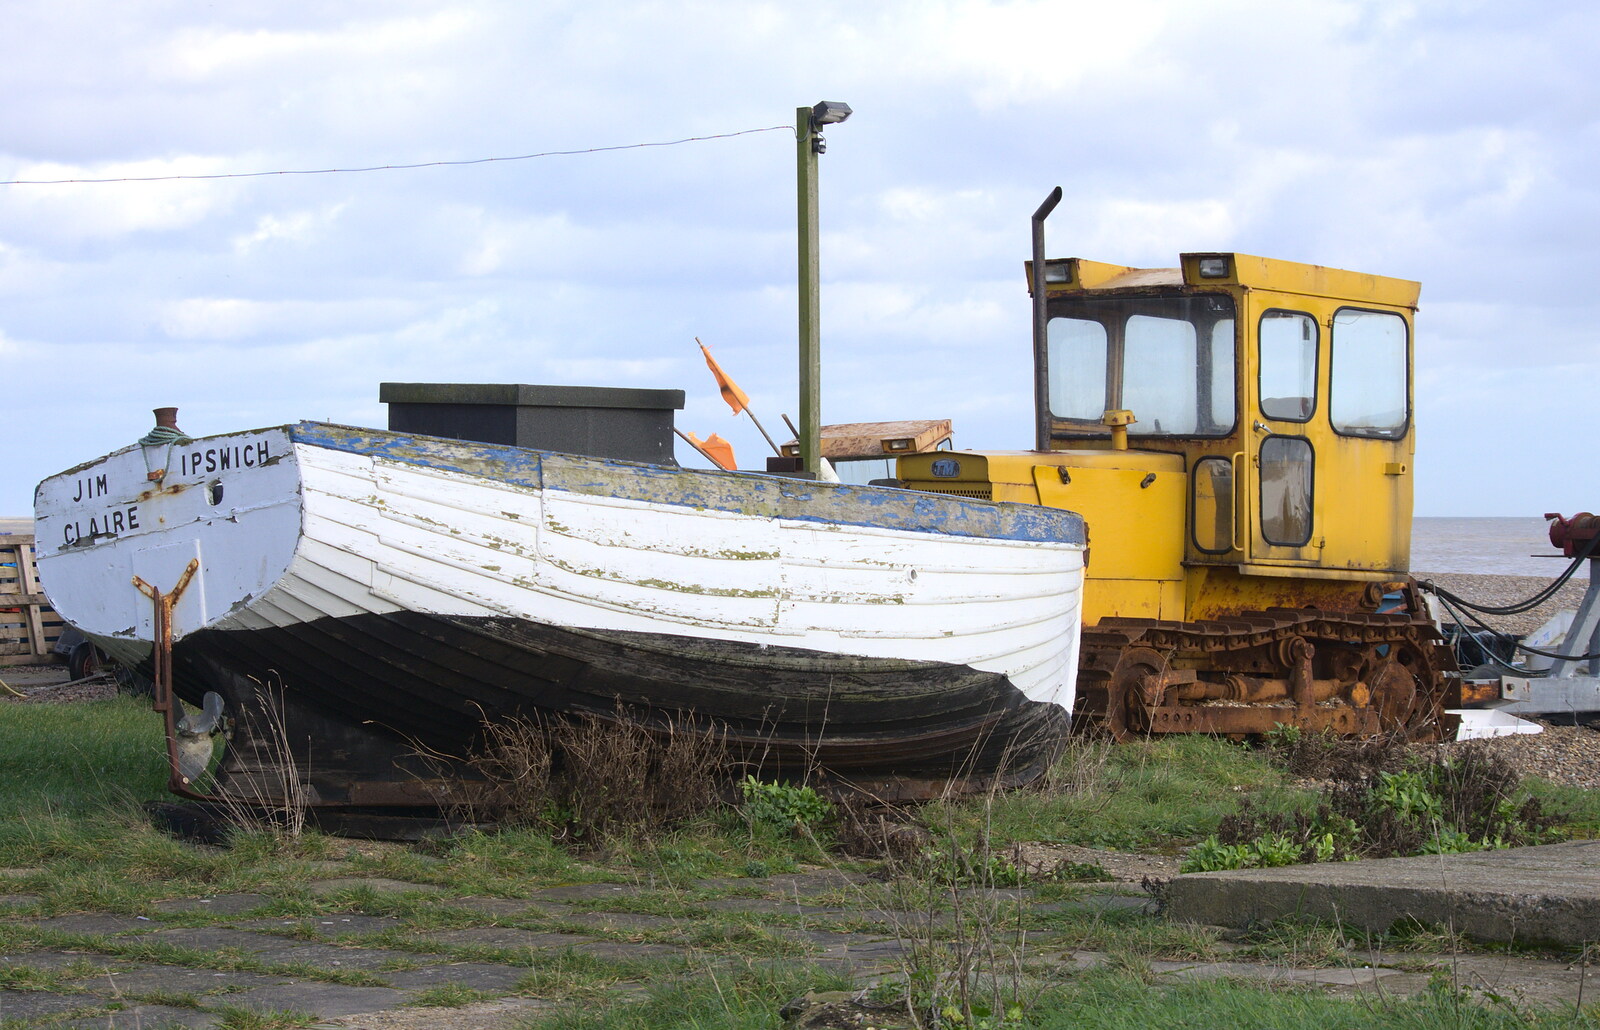 The Jim Claire of Ipswich from A Trip to Aldeburgh, Suffolk - 7th February 2016